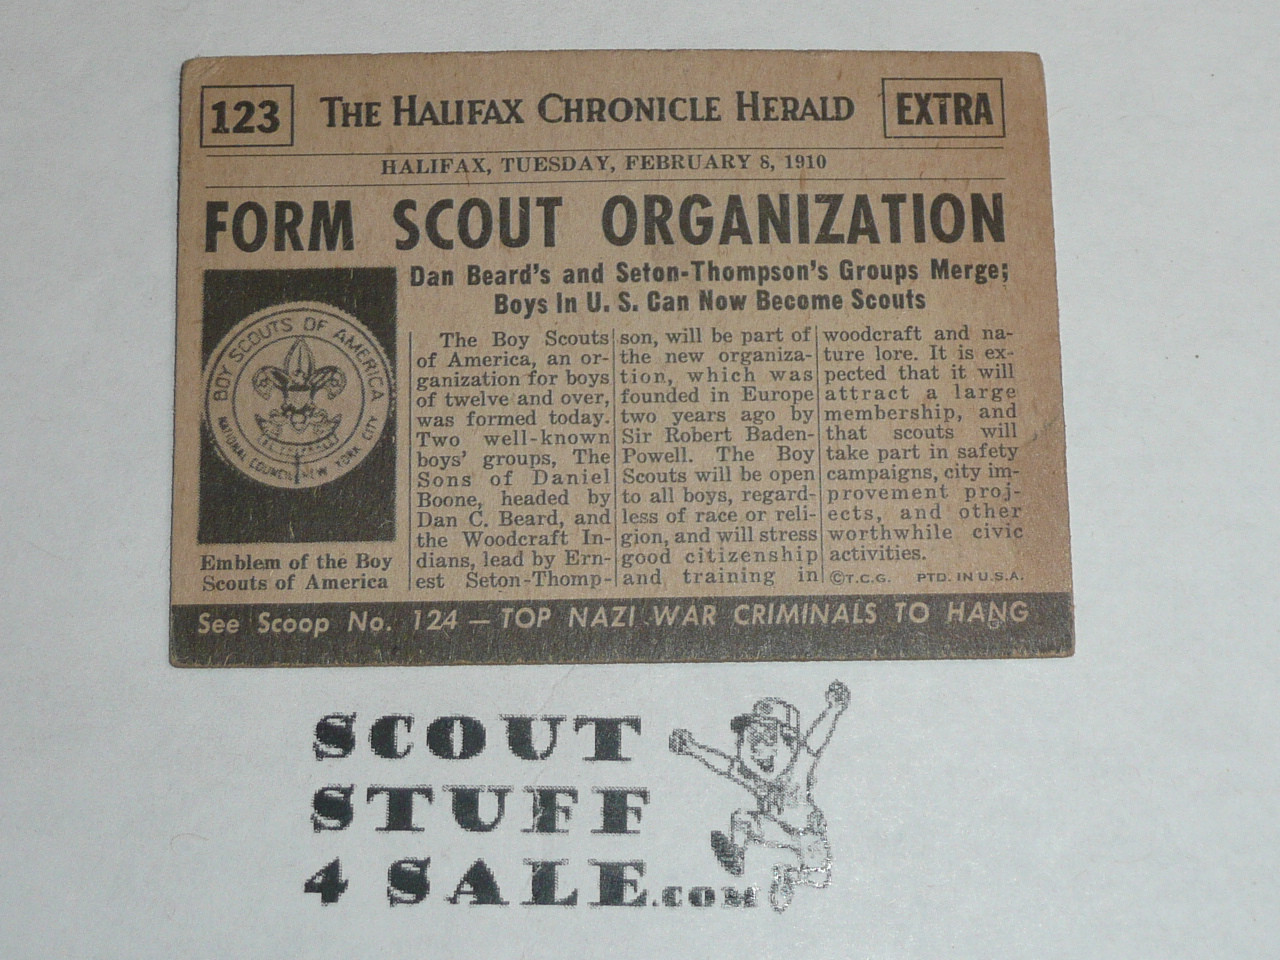 Premium Card commemorating the formation of the Boy Scouts of America